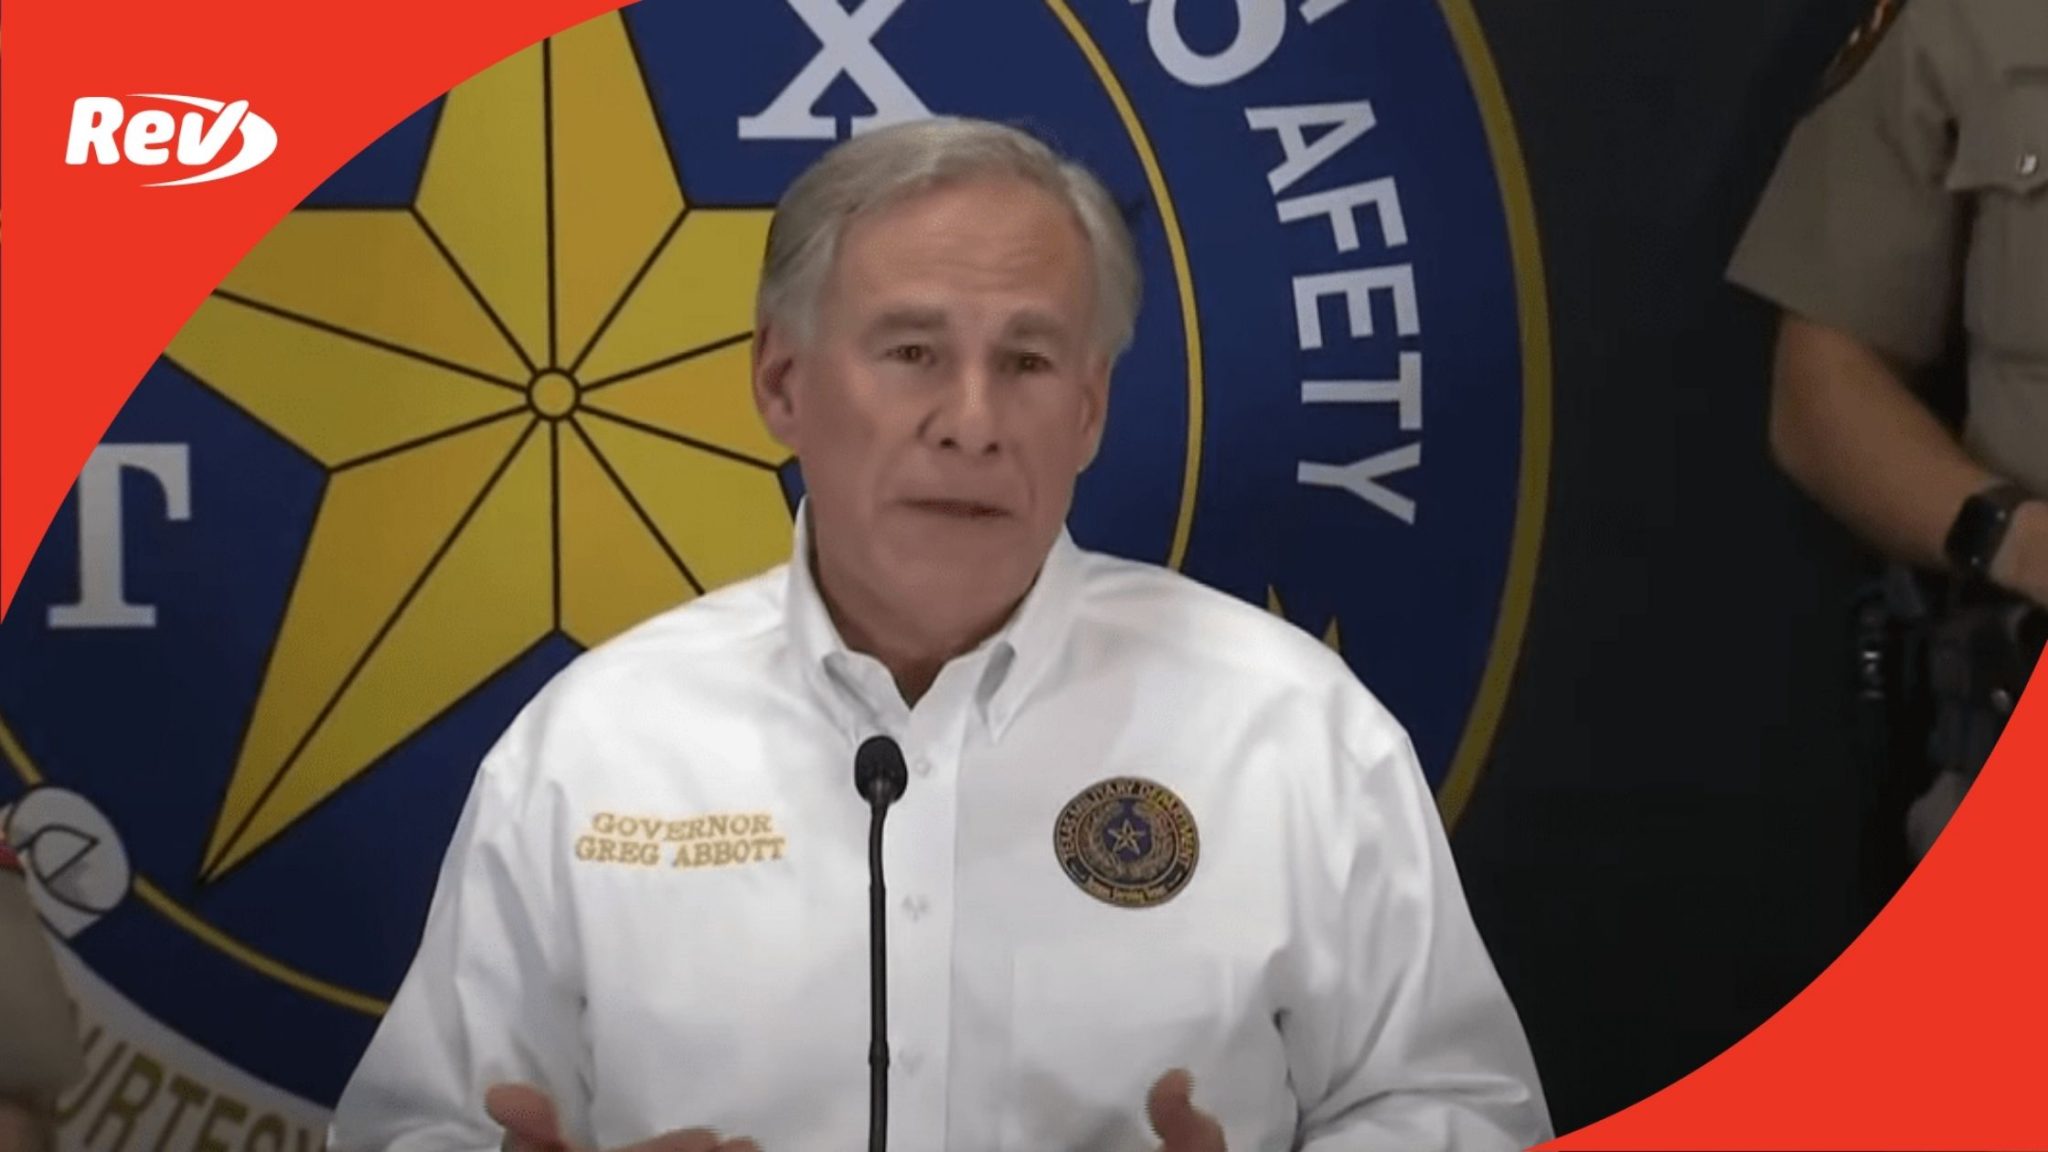 Texas Gov. Greg Abbott holds a press conference on the state's border security efforts 4/06/22 Transcript